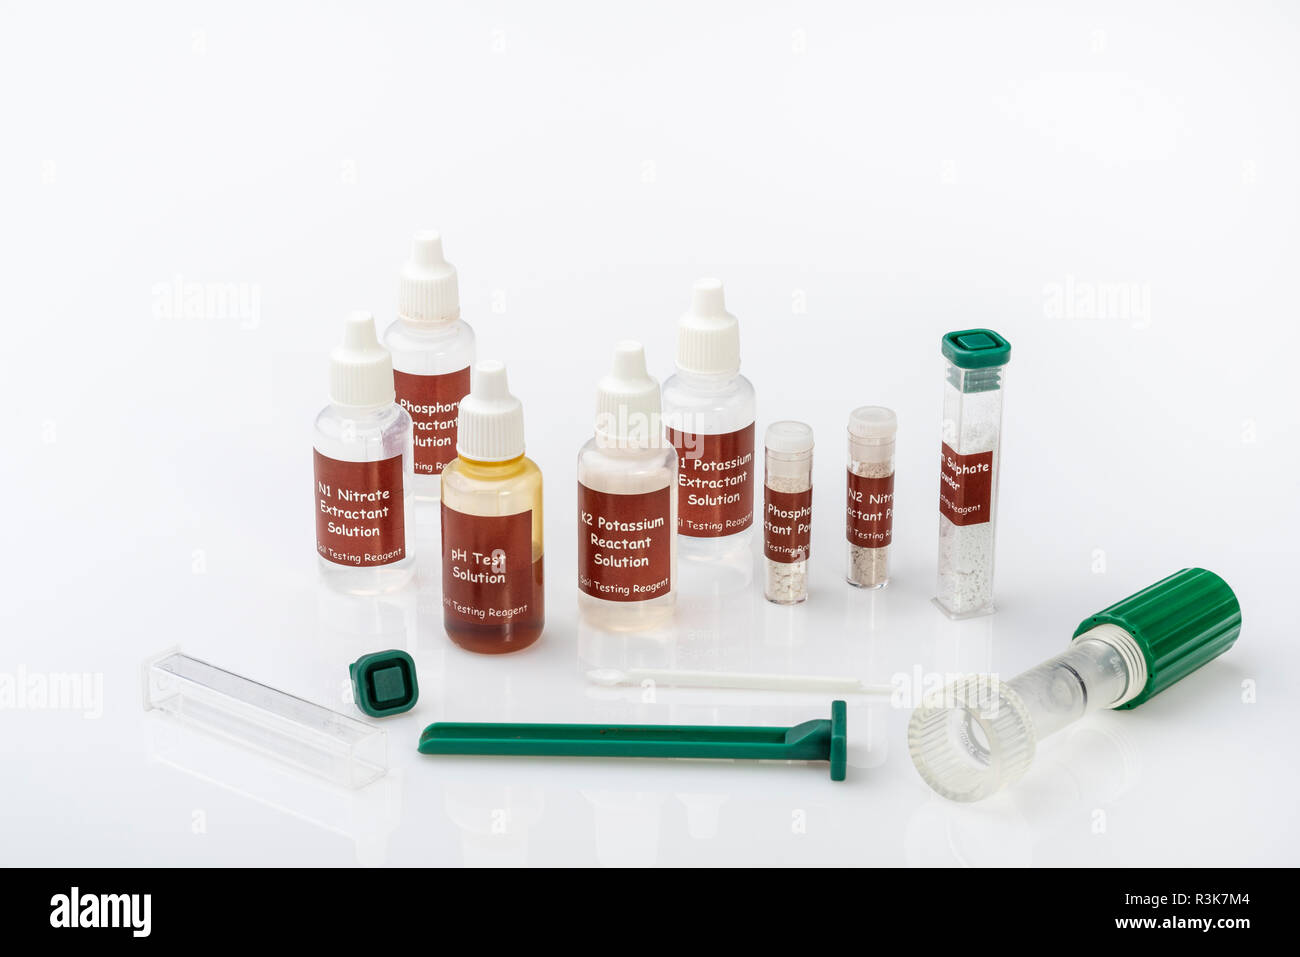 Soil Testing Kit with chemicals for testing potassium, nitrogen, phosphorus and acidity levels in soil. Stock Photo